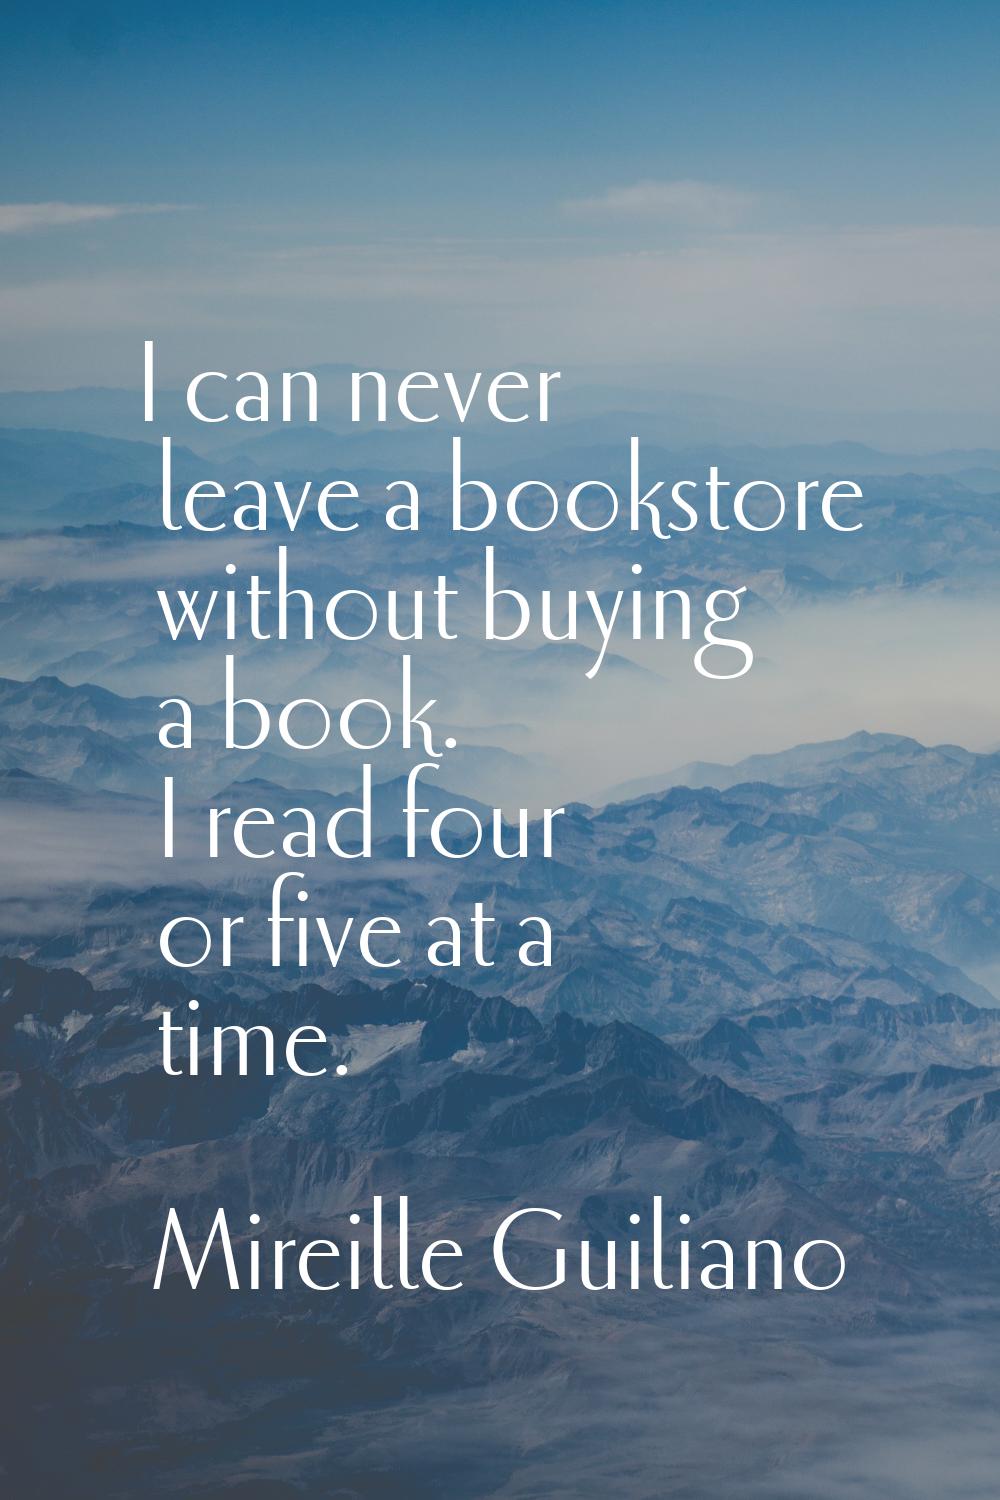 I can never leave a bookstore without buying a book. I read four or five at a time.